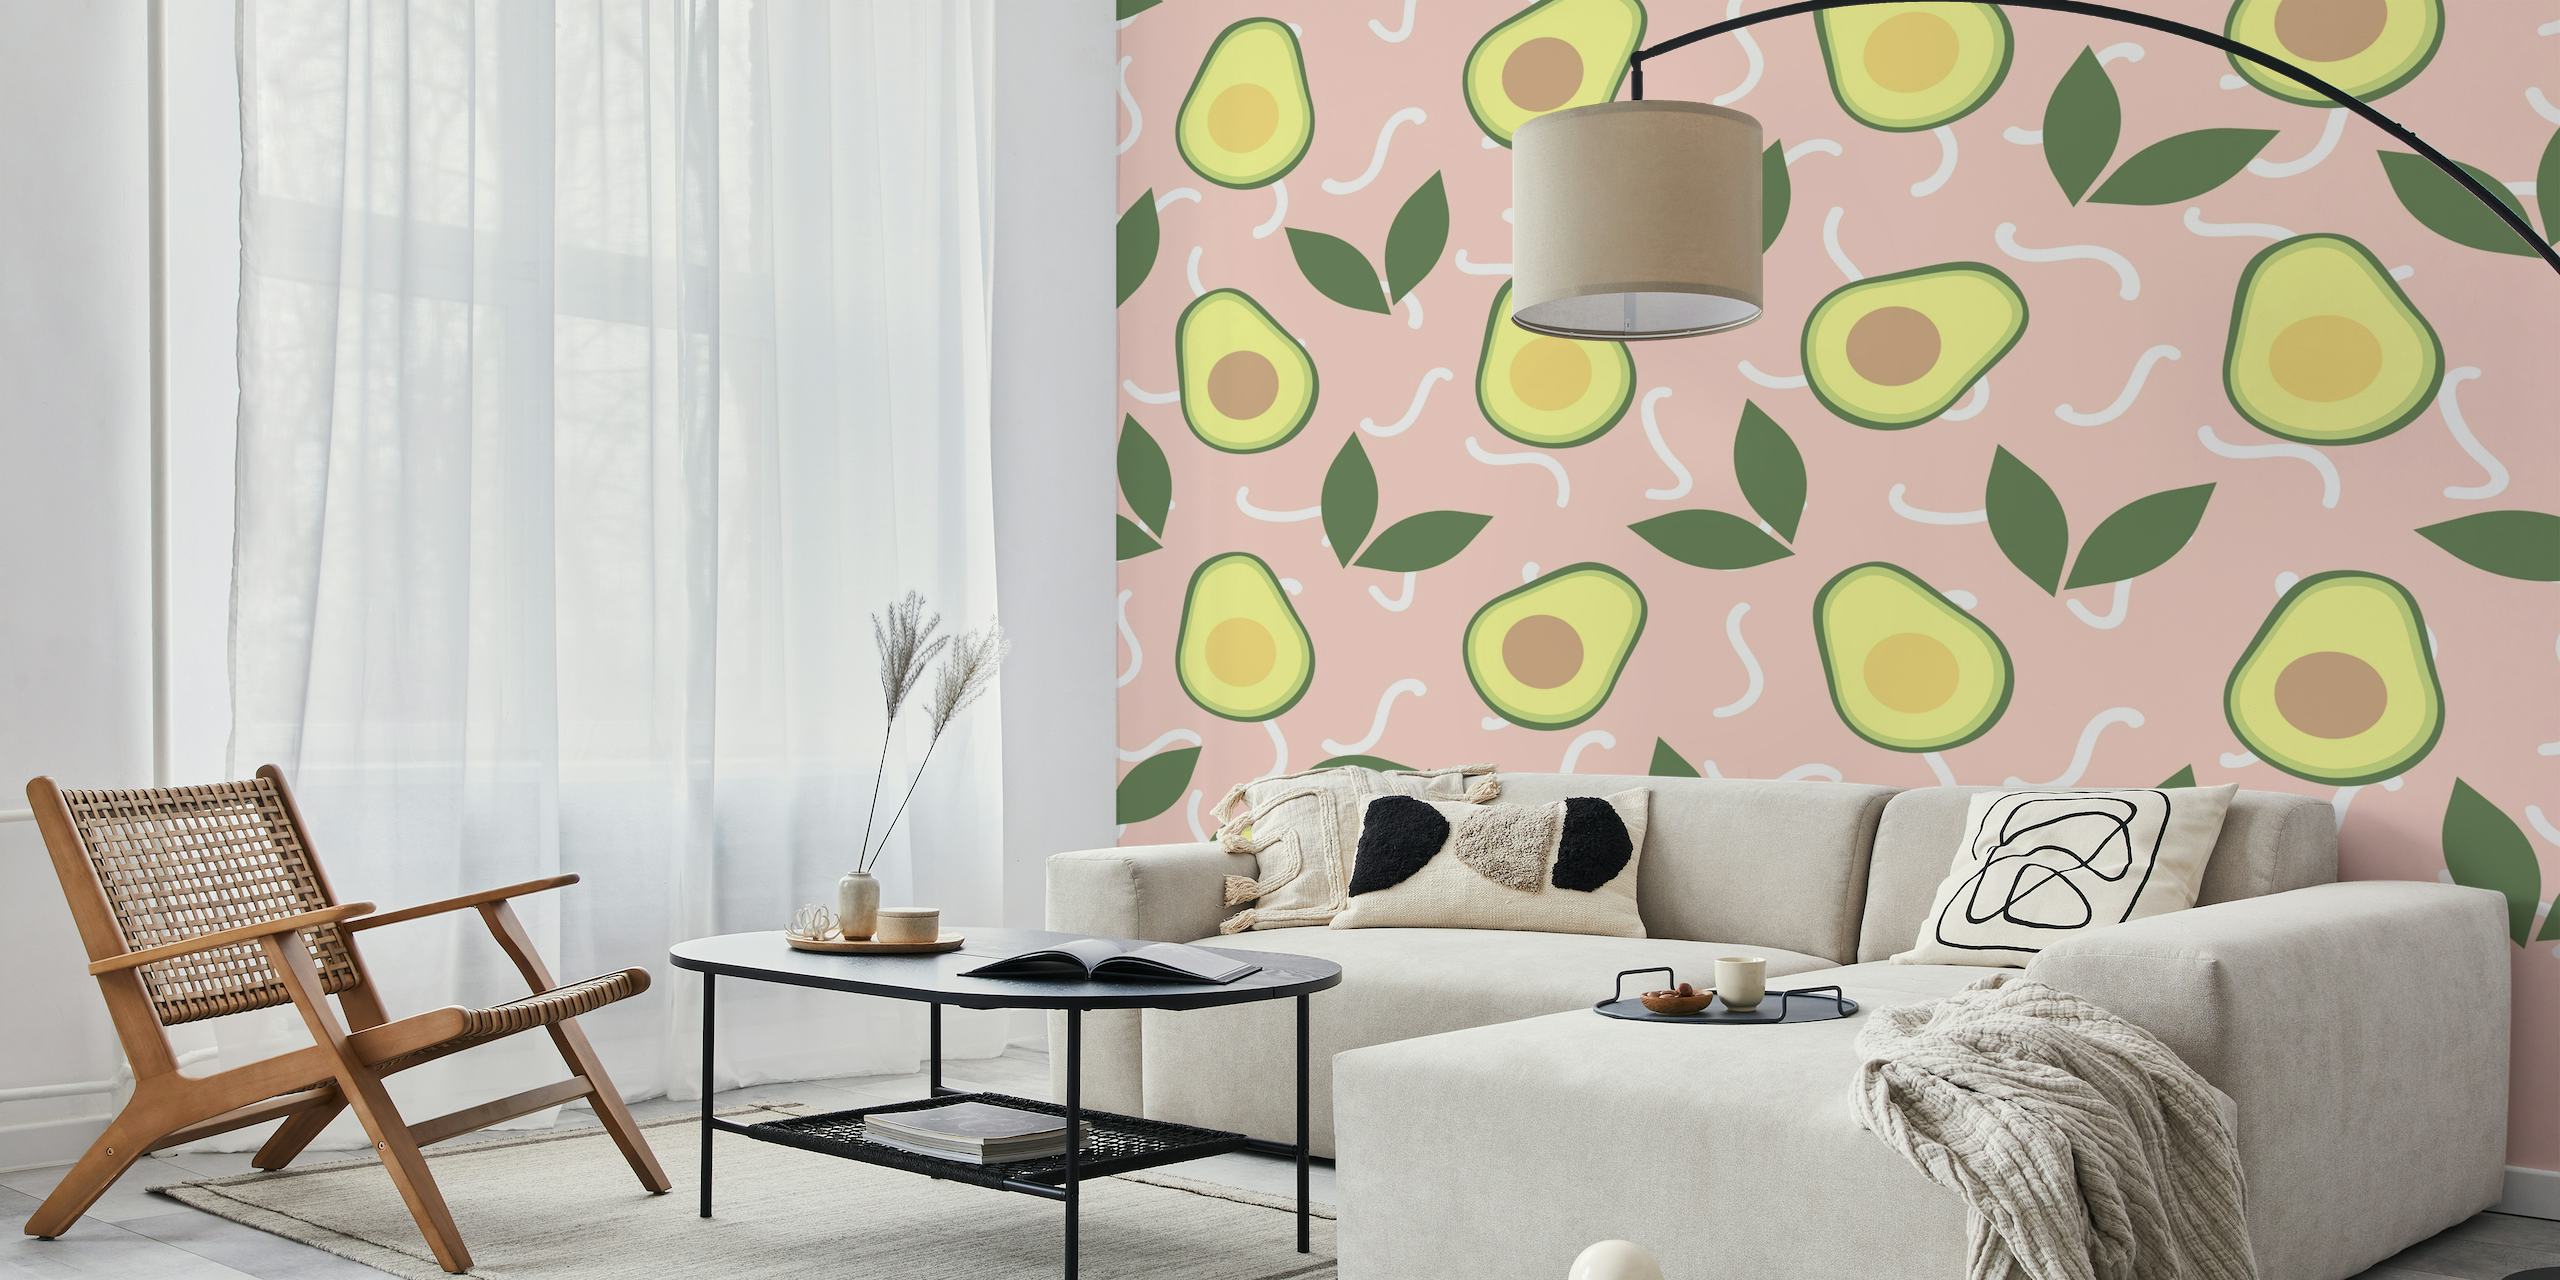 Avocado Fiesta wall mural with avocado and leaf pattern on a pink background.